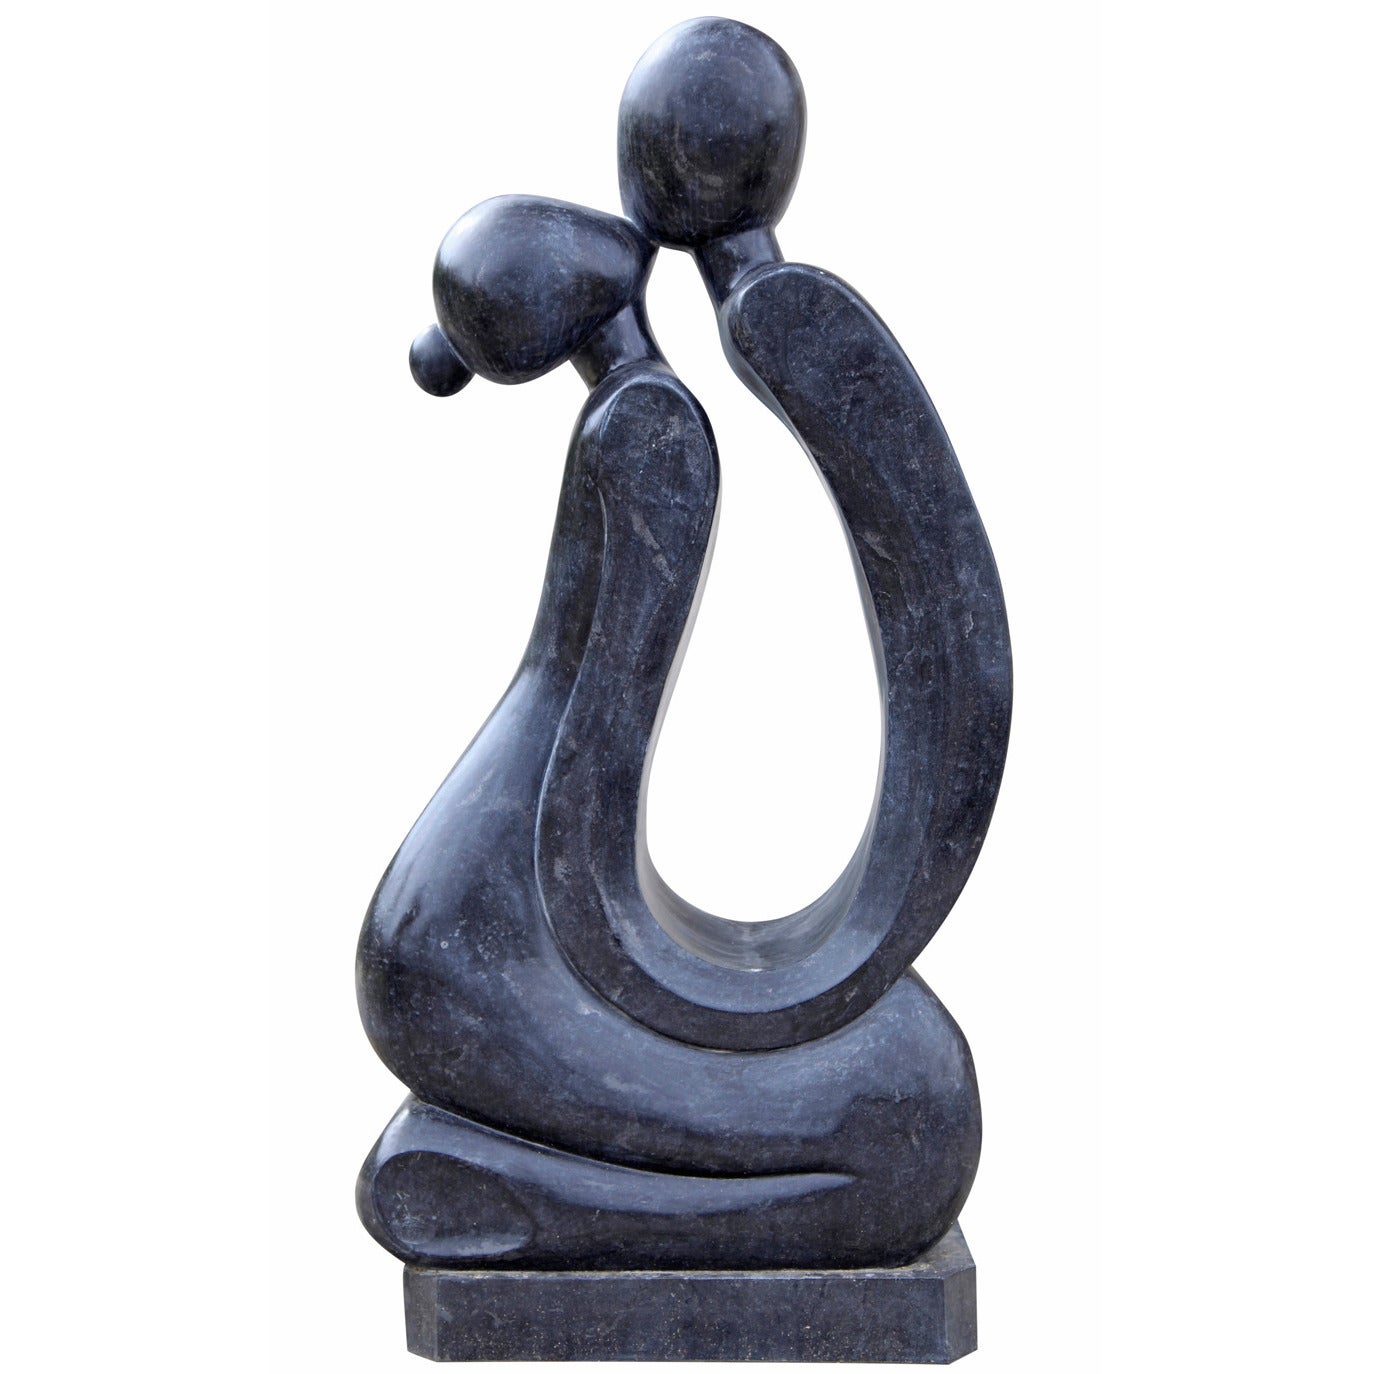 Marble Sculpture of a Kissing Couple in Abstract Shapes